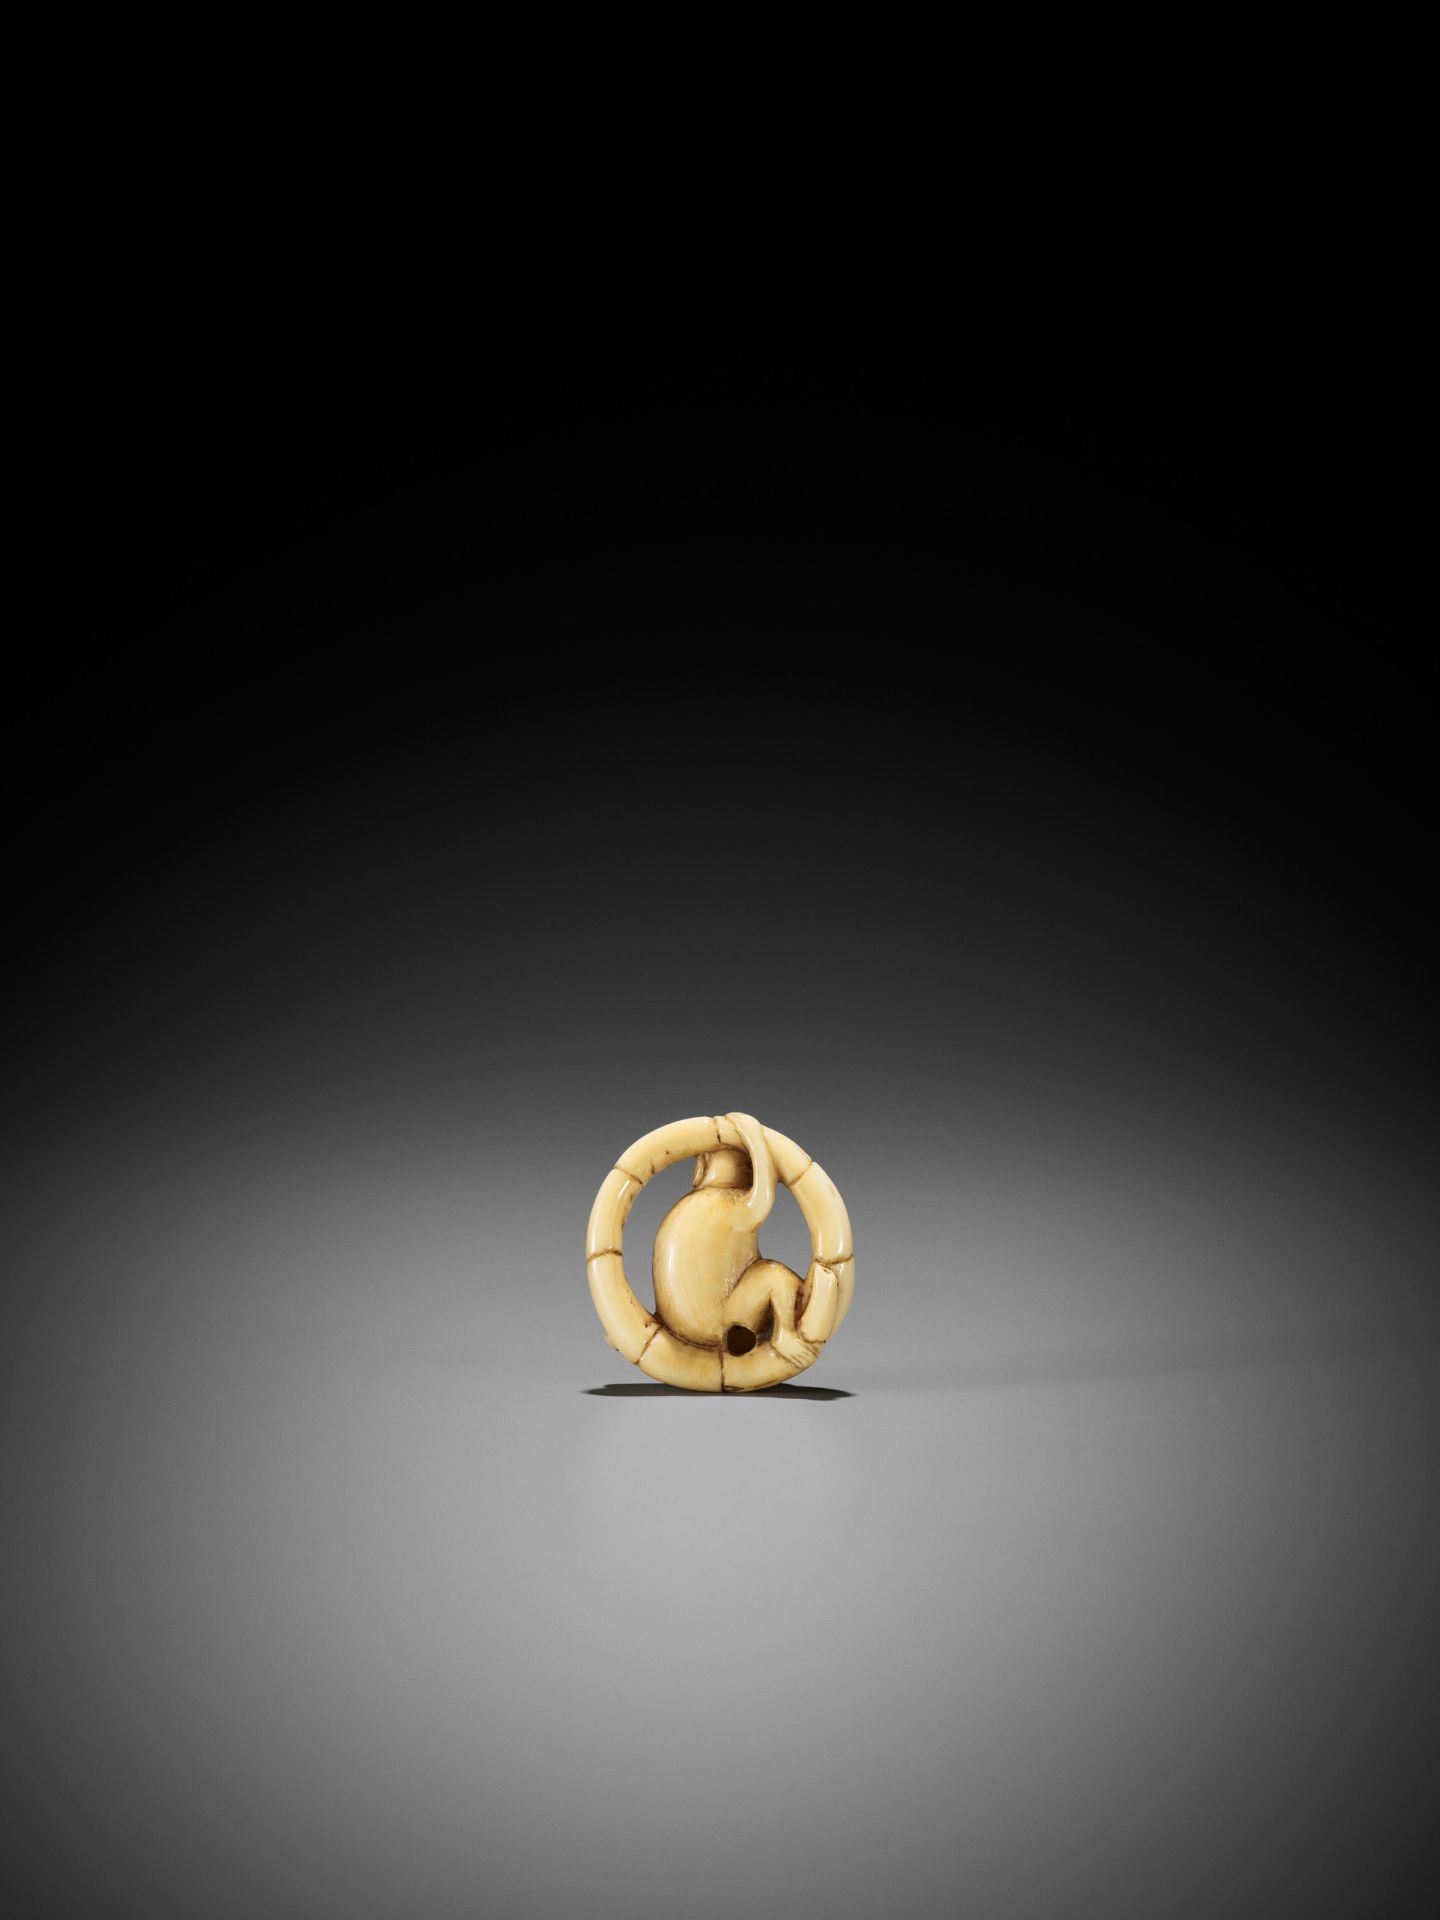 A MARINE IVORY NETSUKE OF A MONKEY SITTING IN A COILED BAMBOO NODE - Image 5 of 9